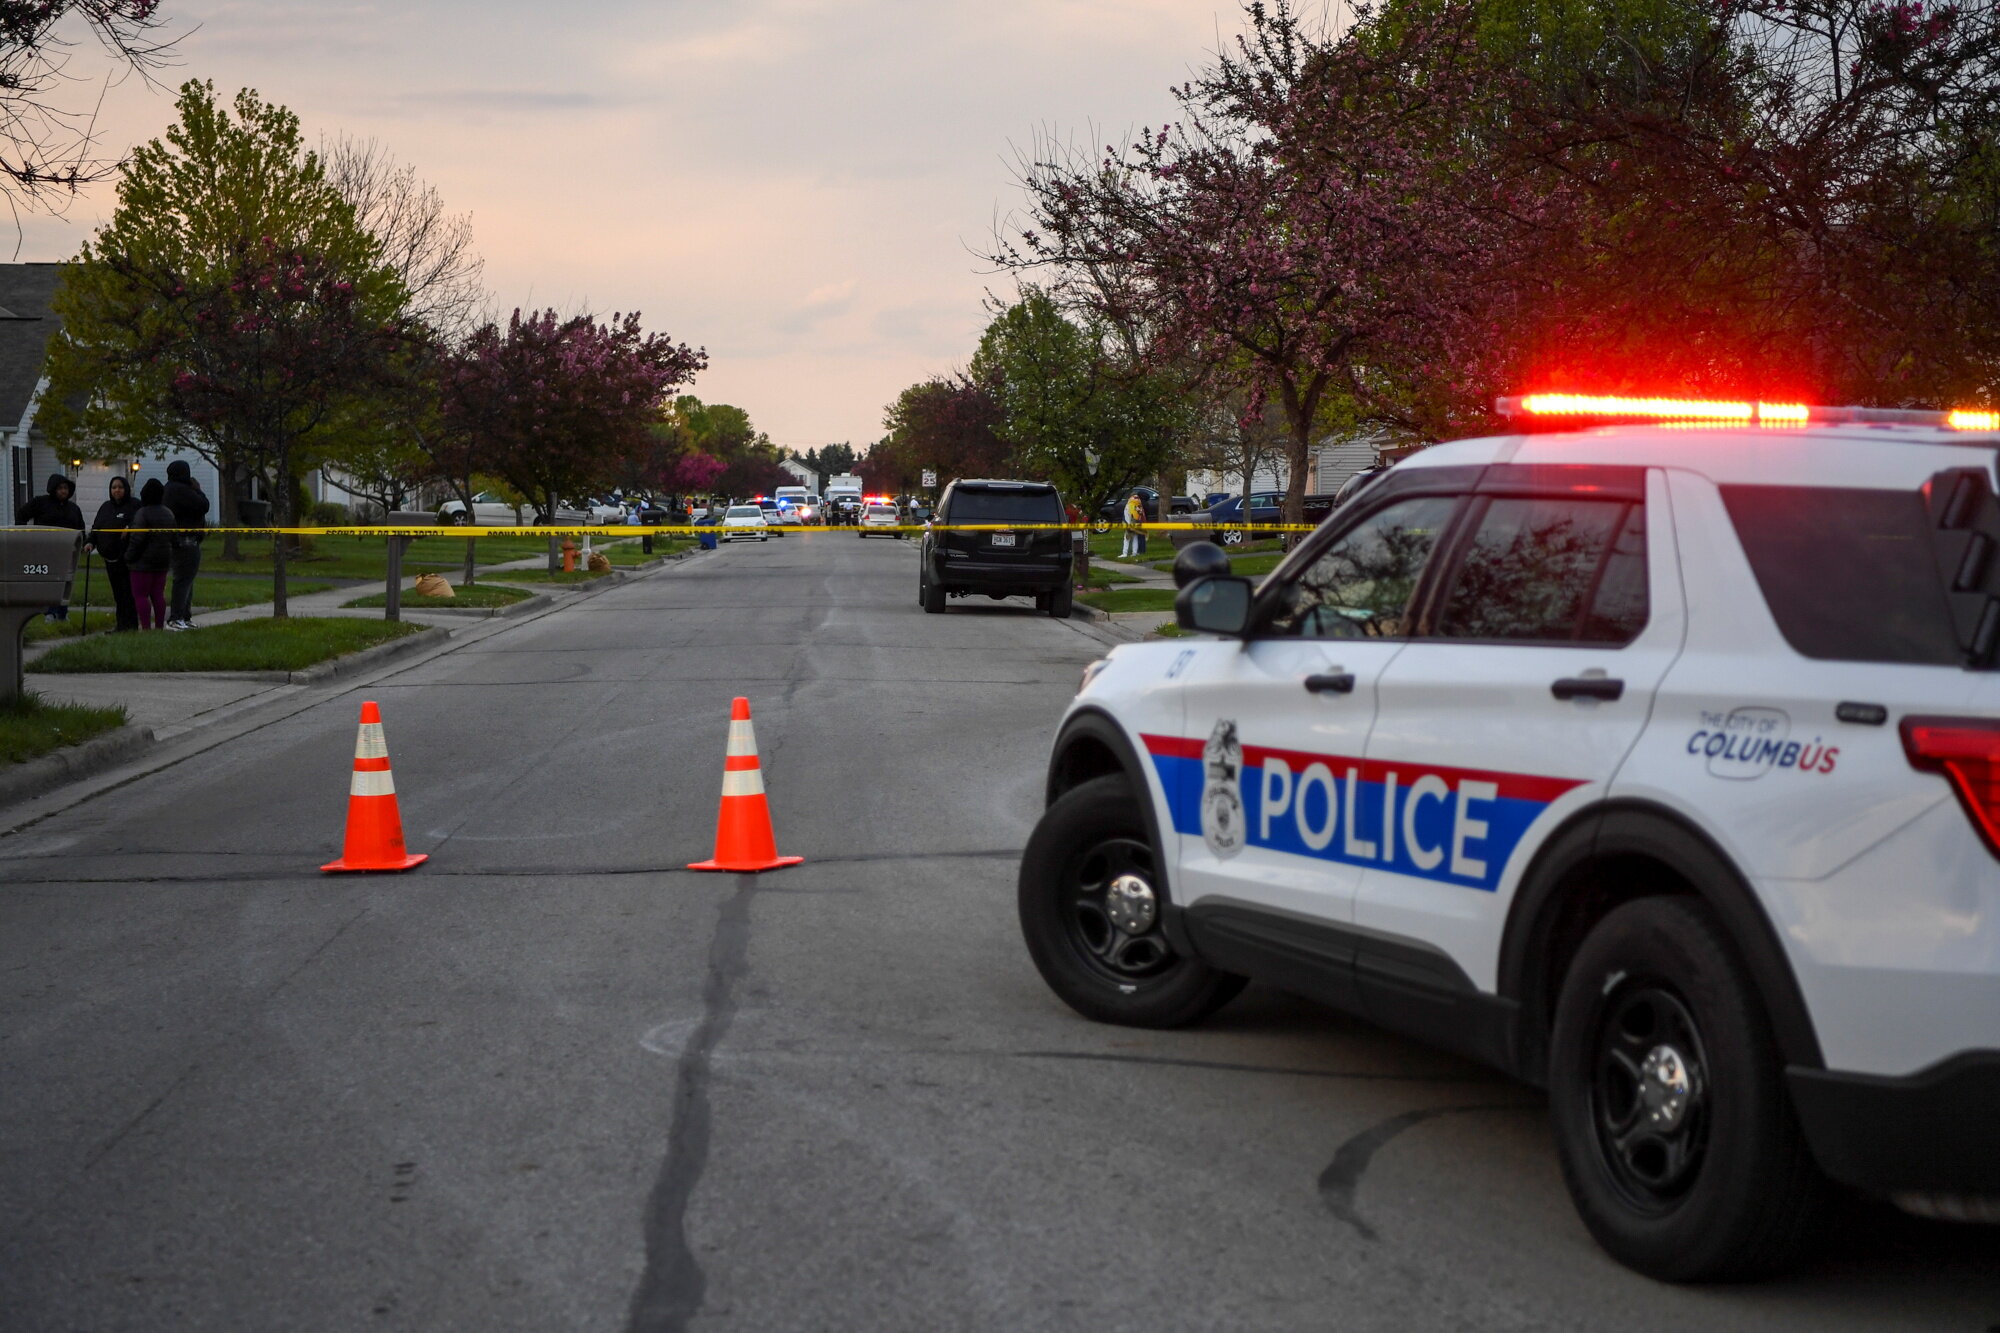 Sadly, a teenage girl was fatally shot by the Police in Columbus, Officials Say